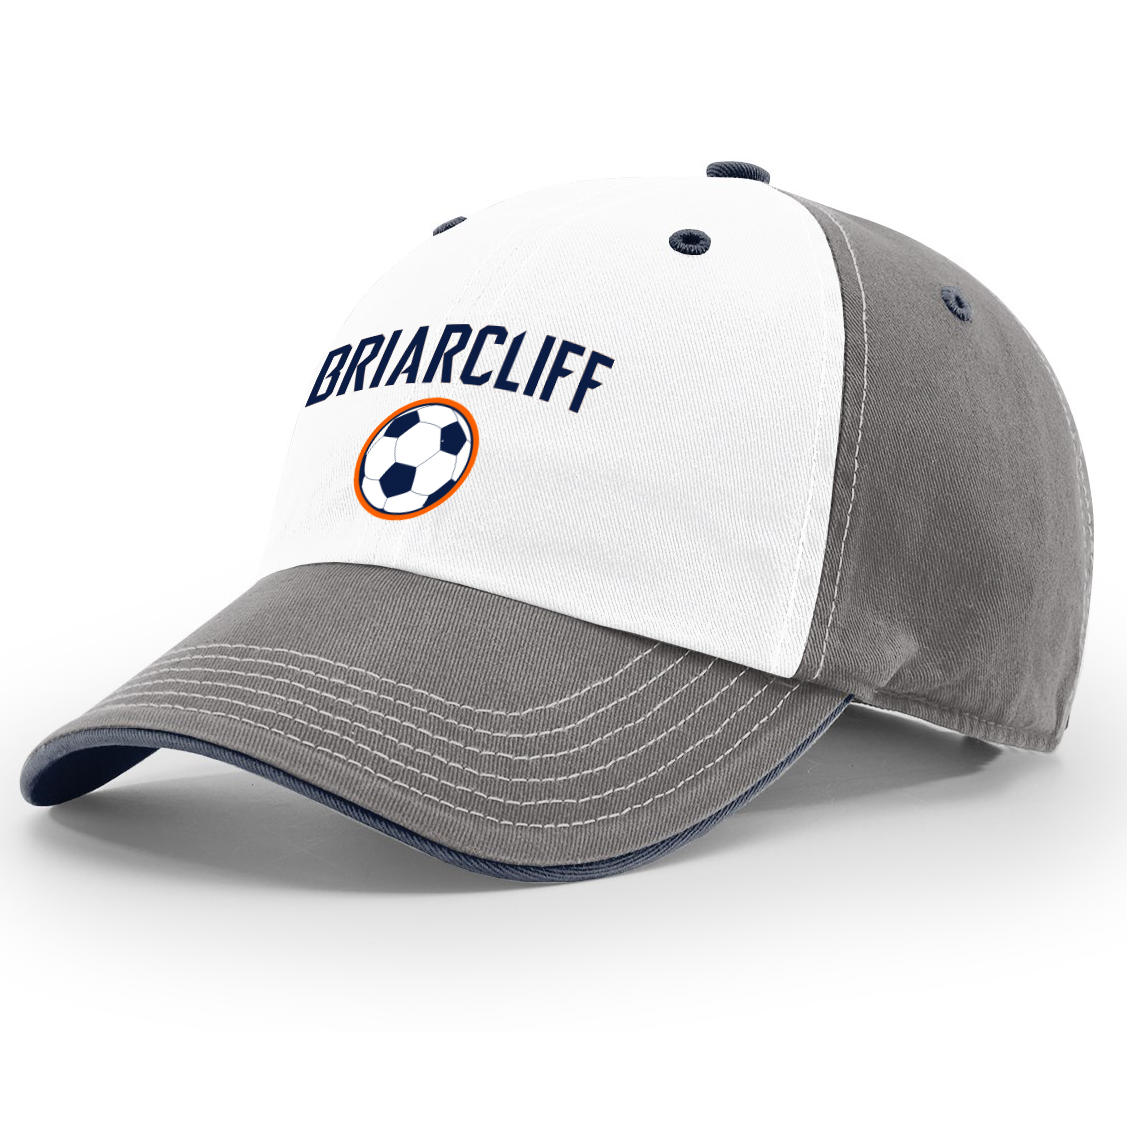 Briarcliff Soccer Richardson Washed Hat